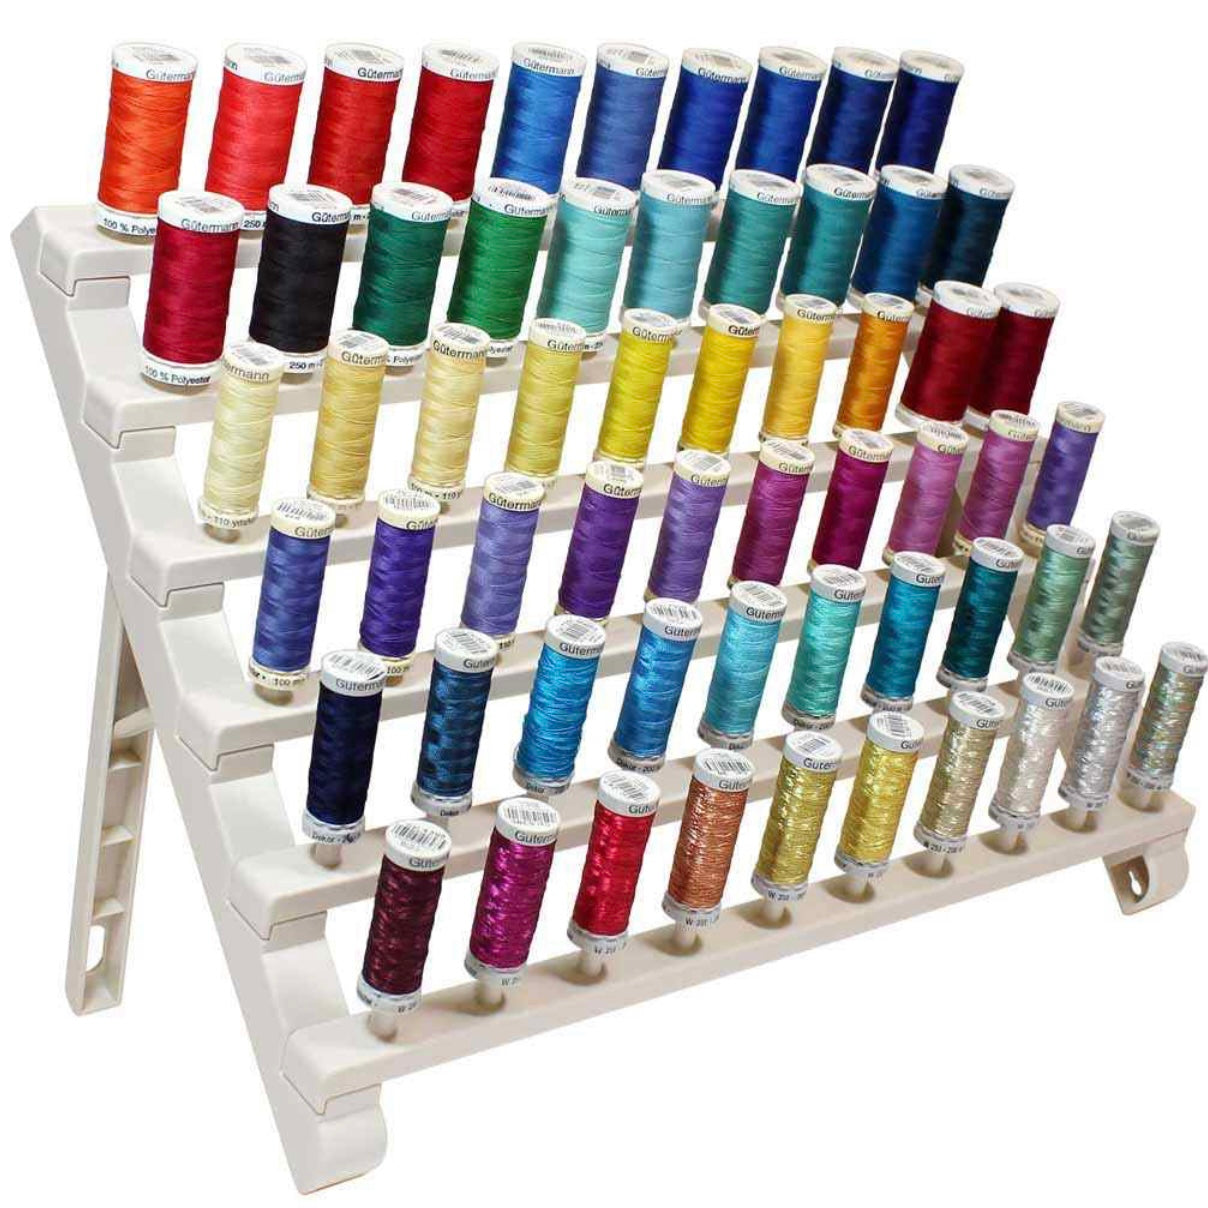 Thread Stand - Holds 60 Spools